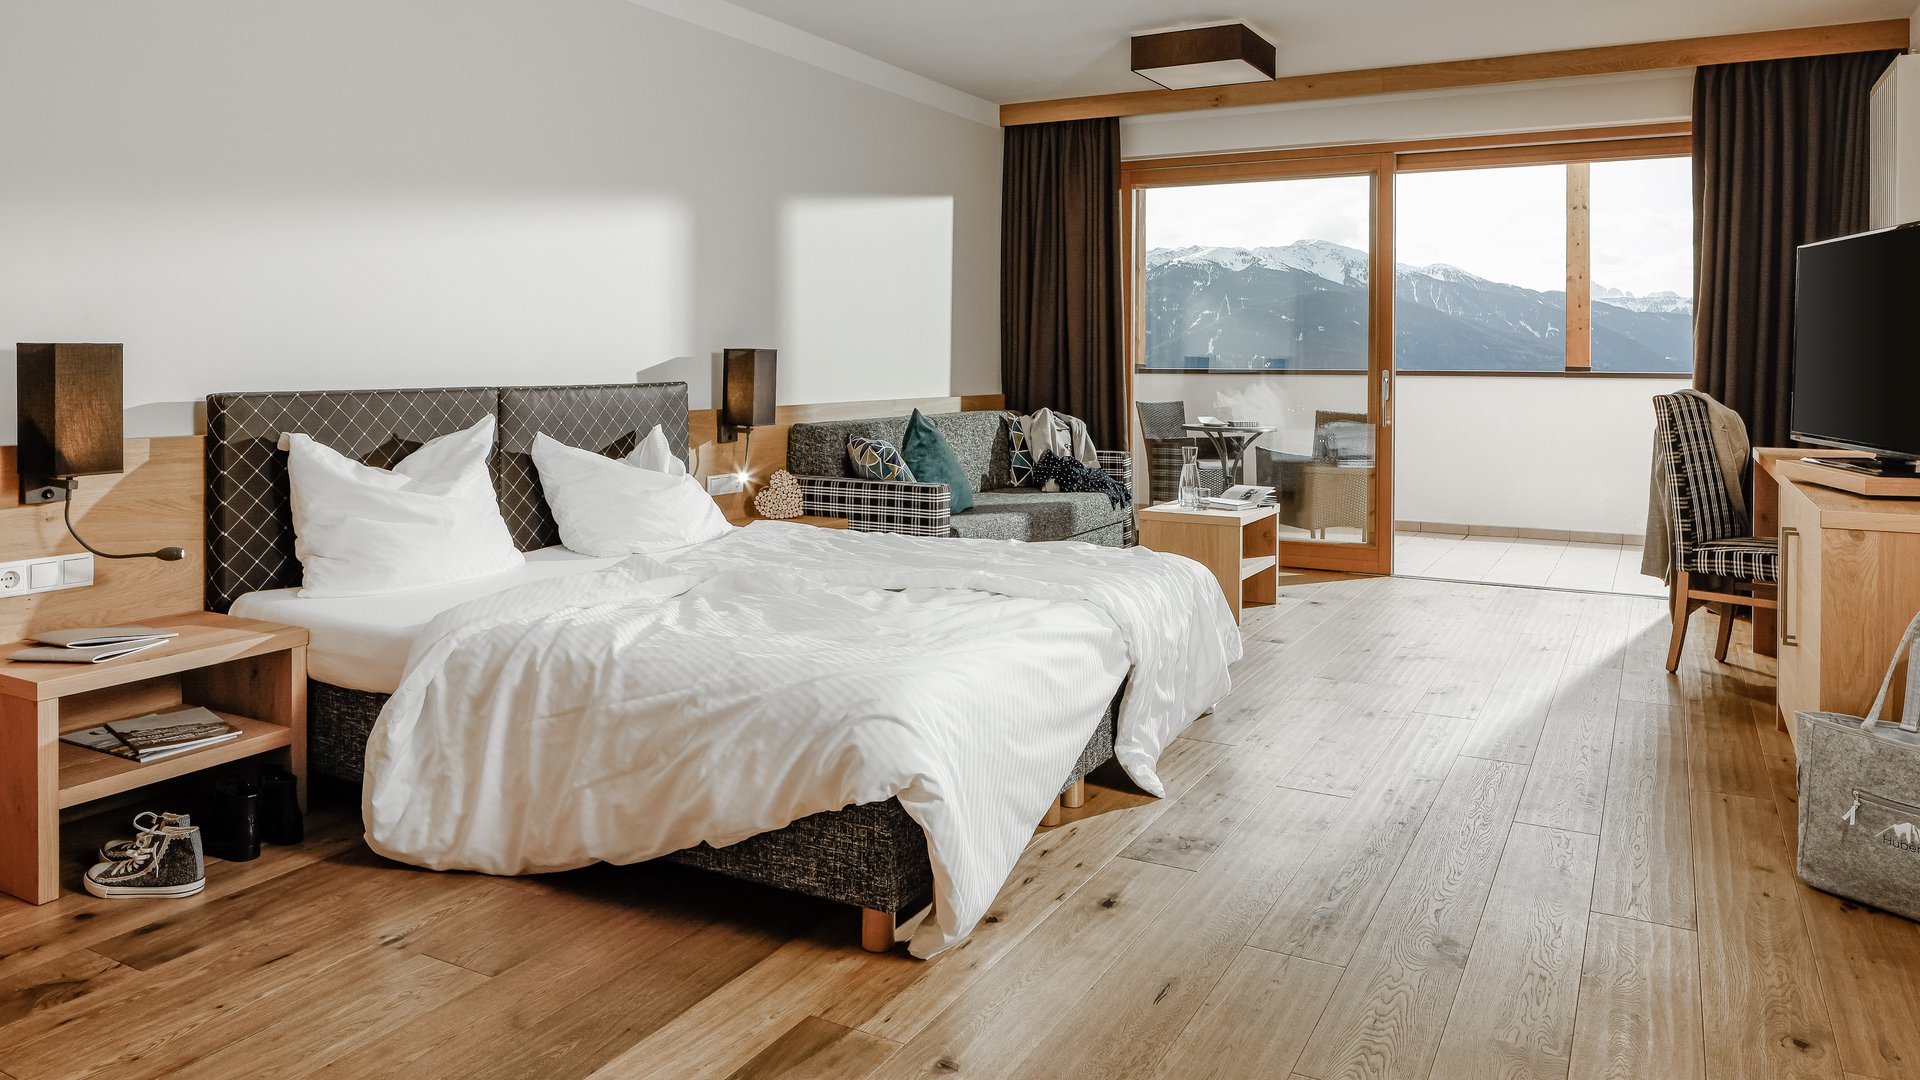 4-star hotel in South Tyrol: our rooms